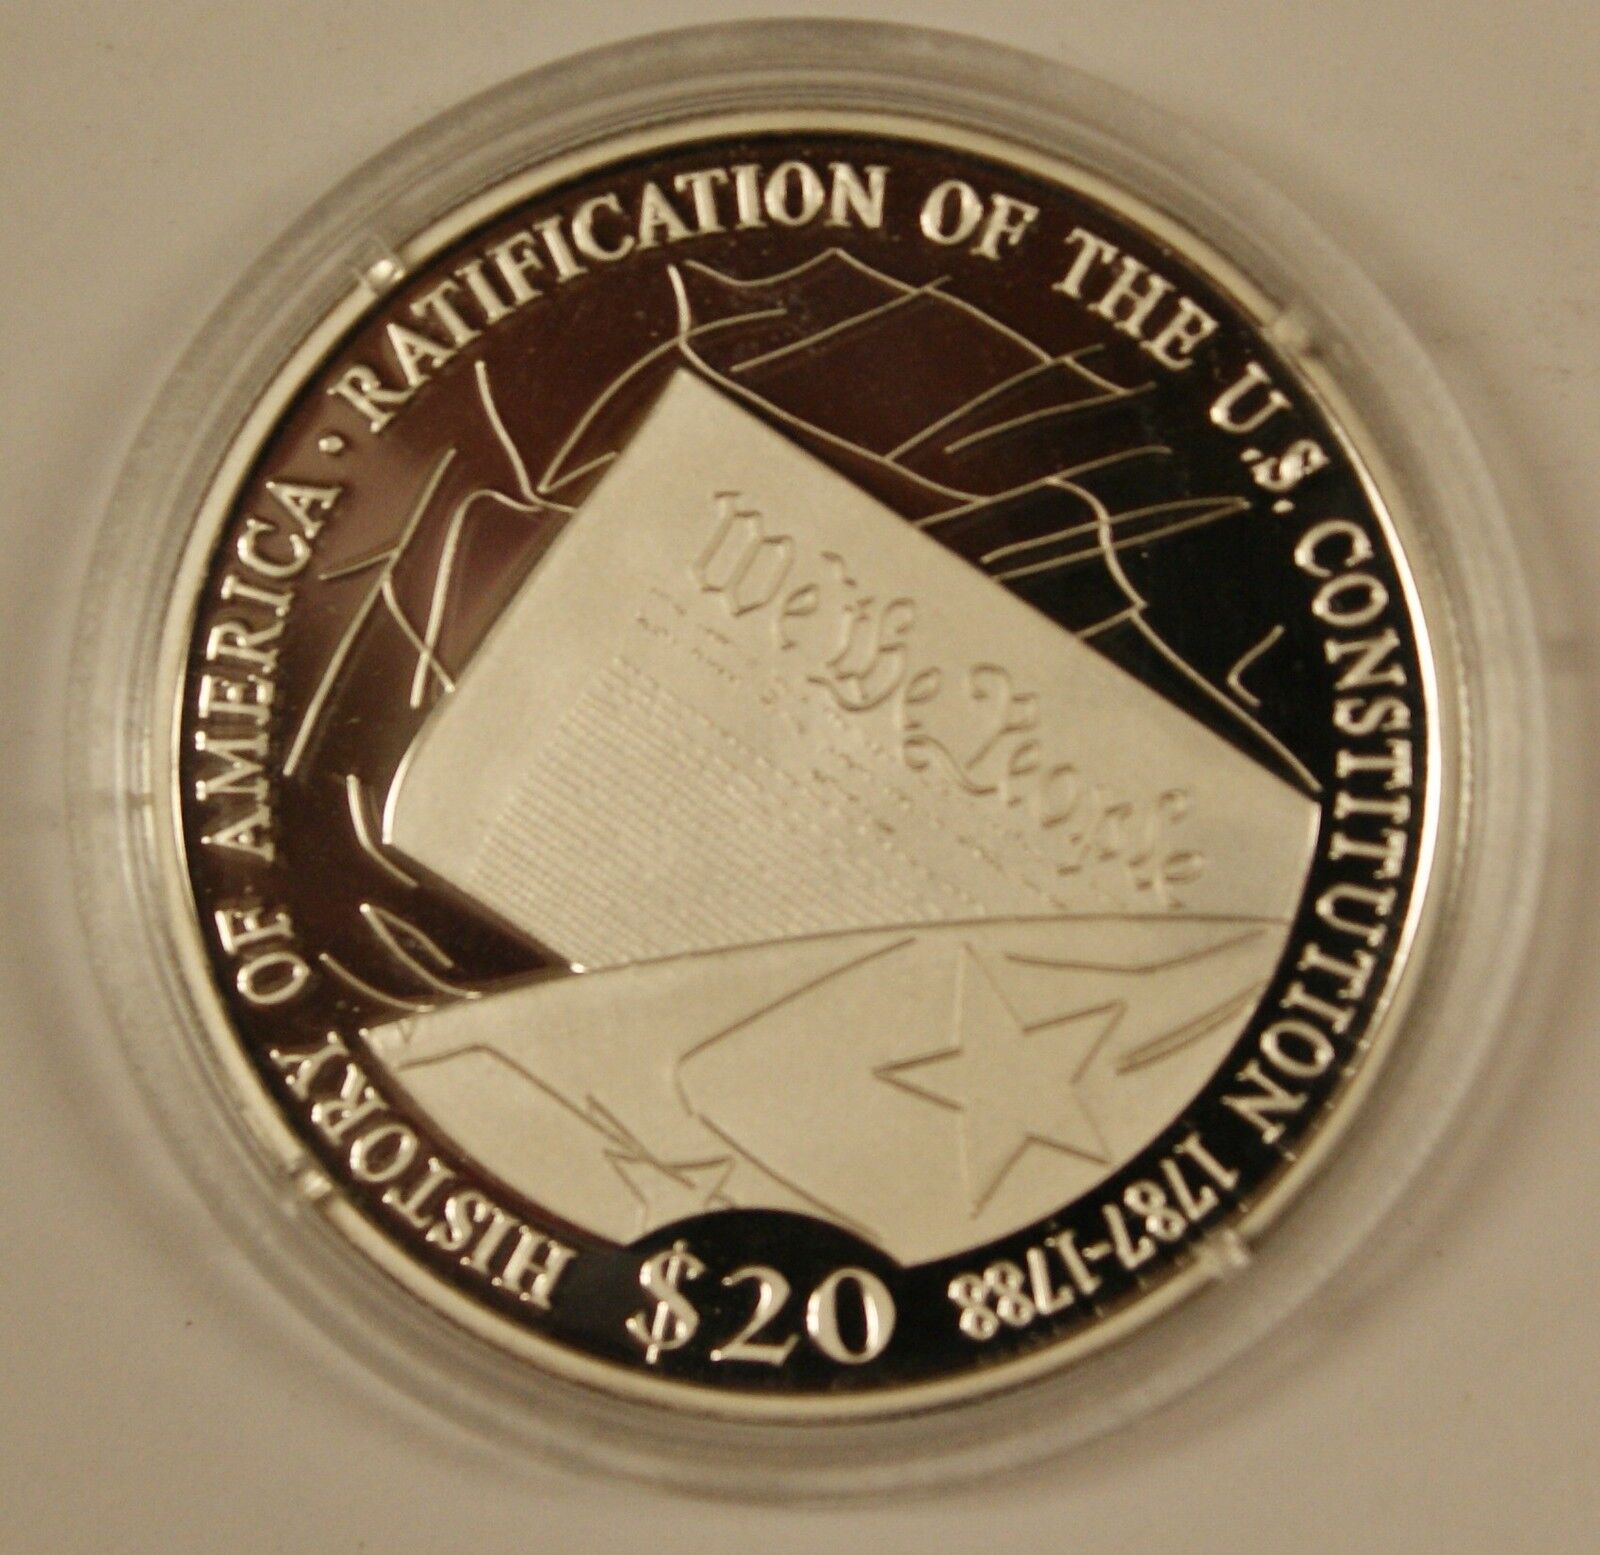 2006 Liberian 20 Dollar Silver Coin, The Ratification of the U.S. Constitution